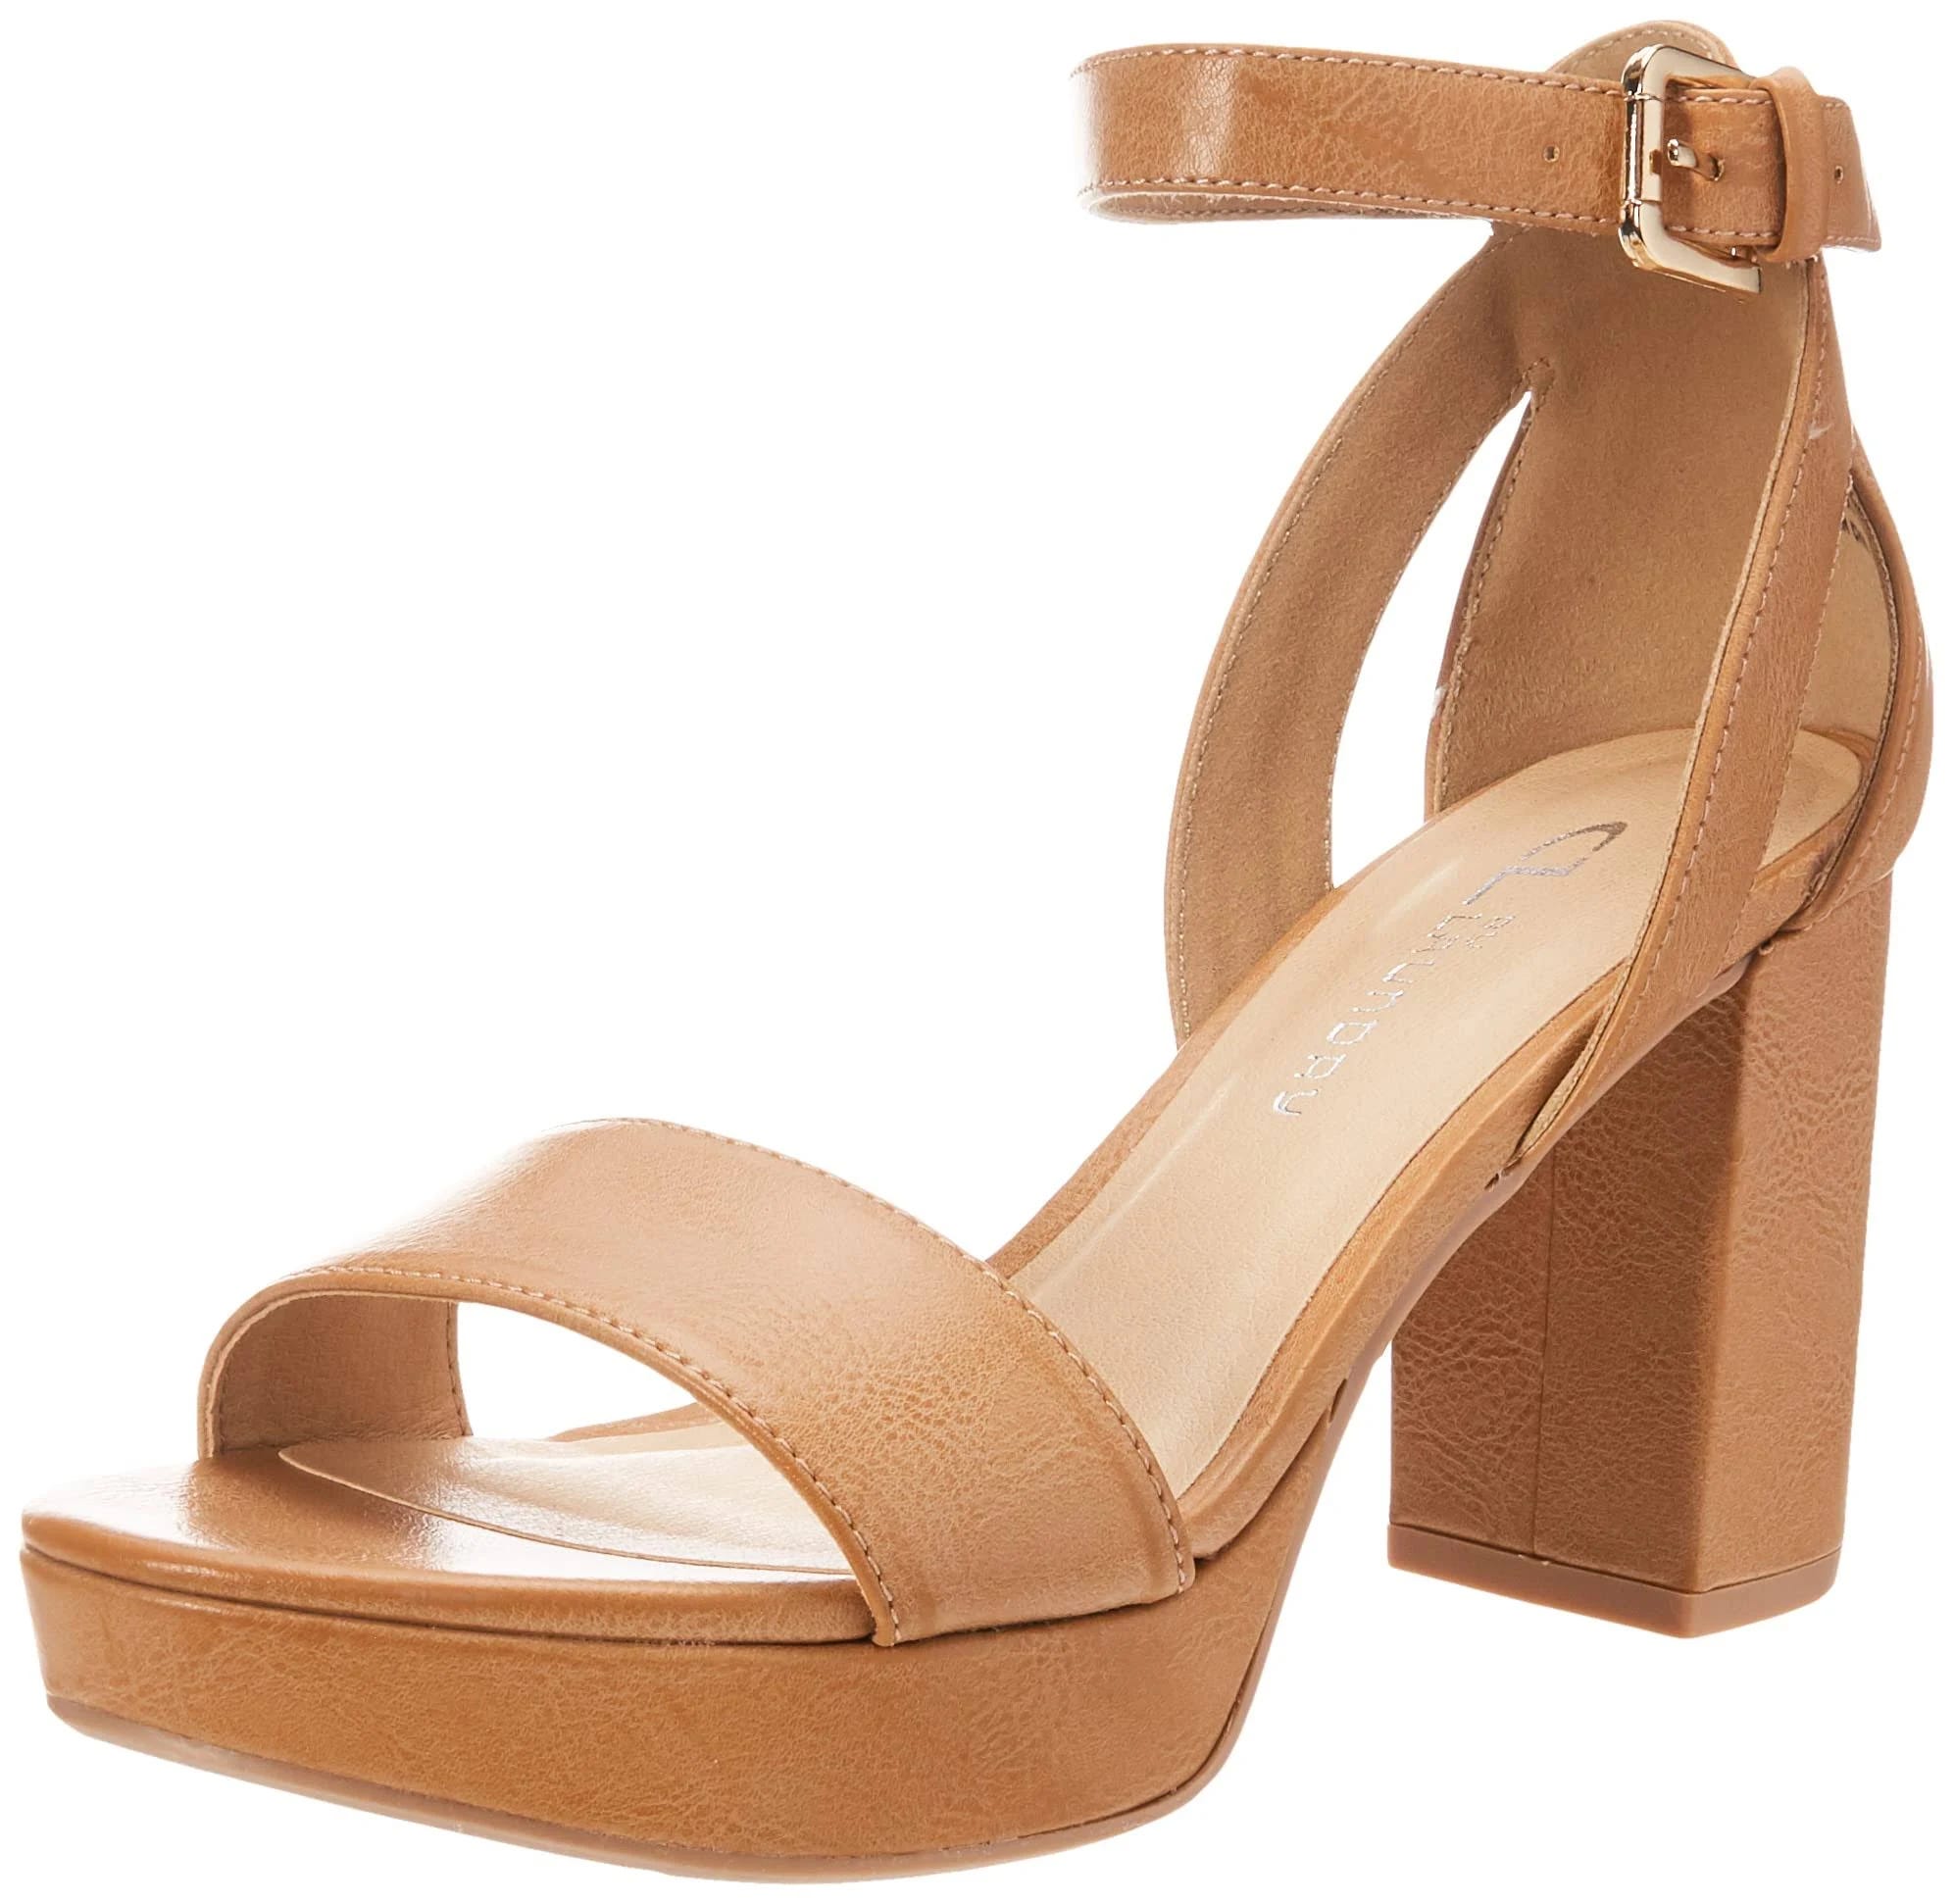 Classic Strappy Nude Heel (US Size) | Image